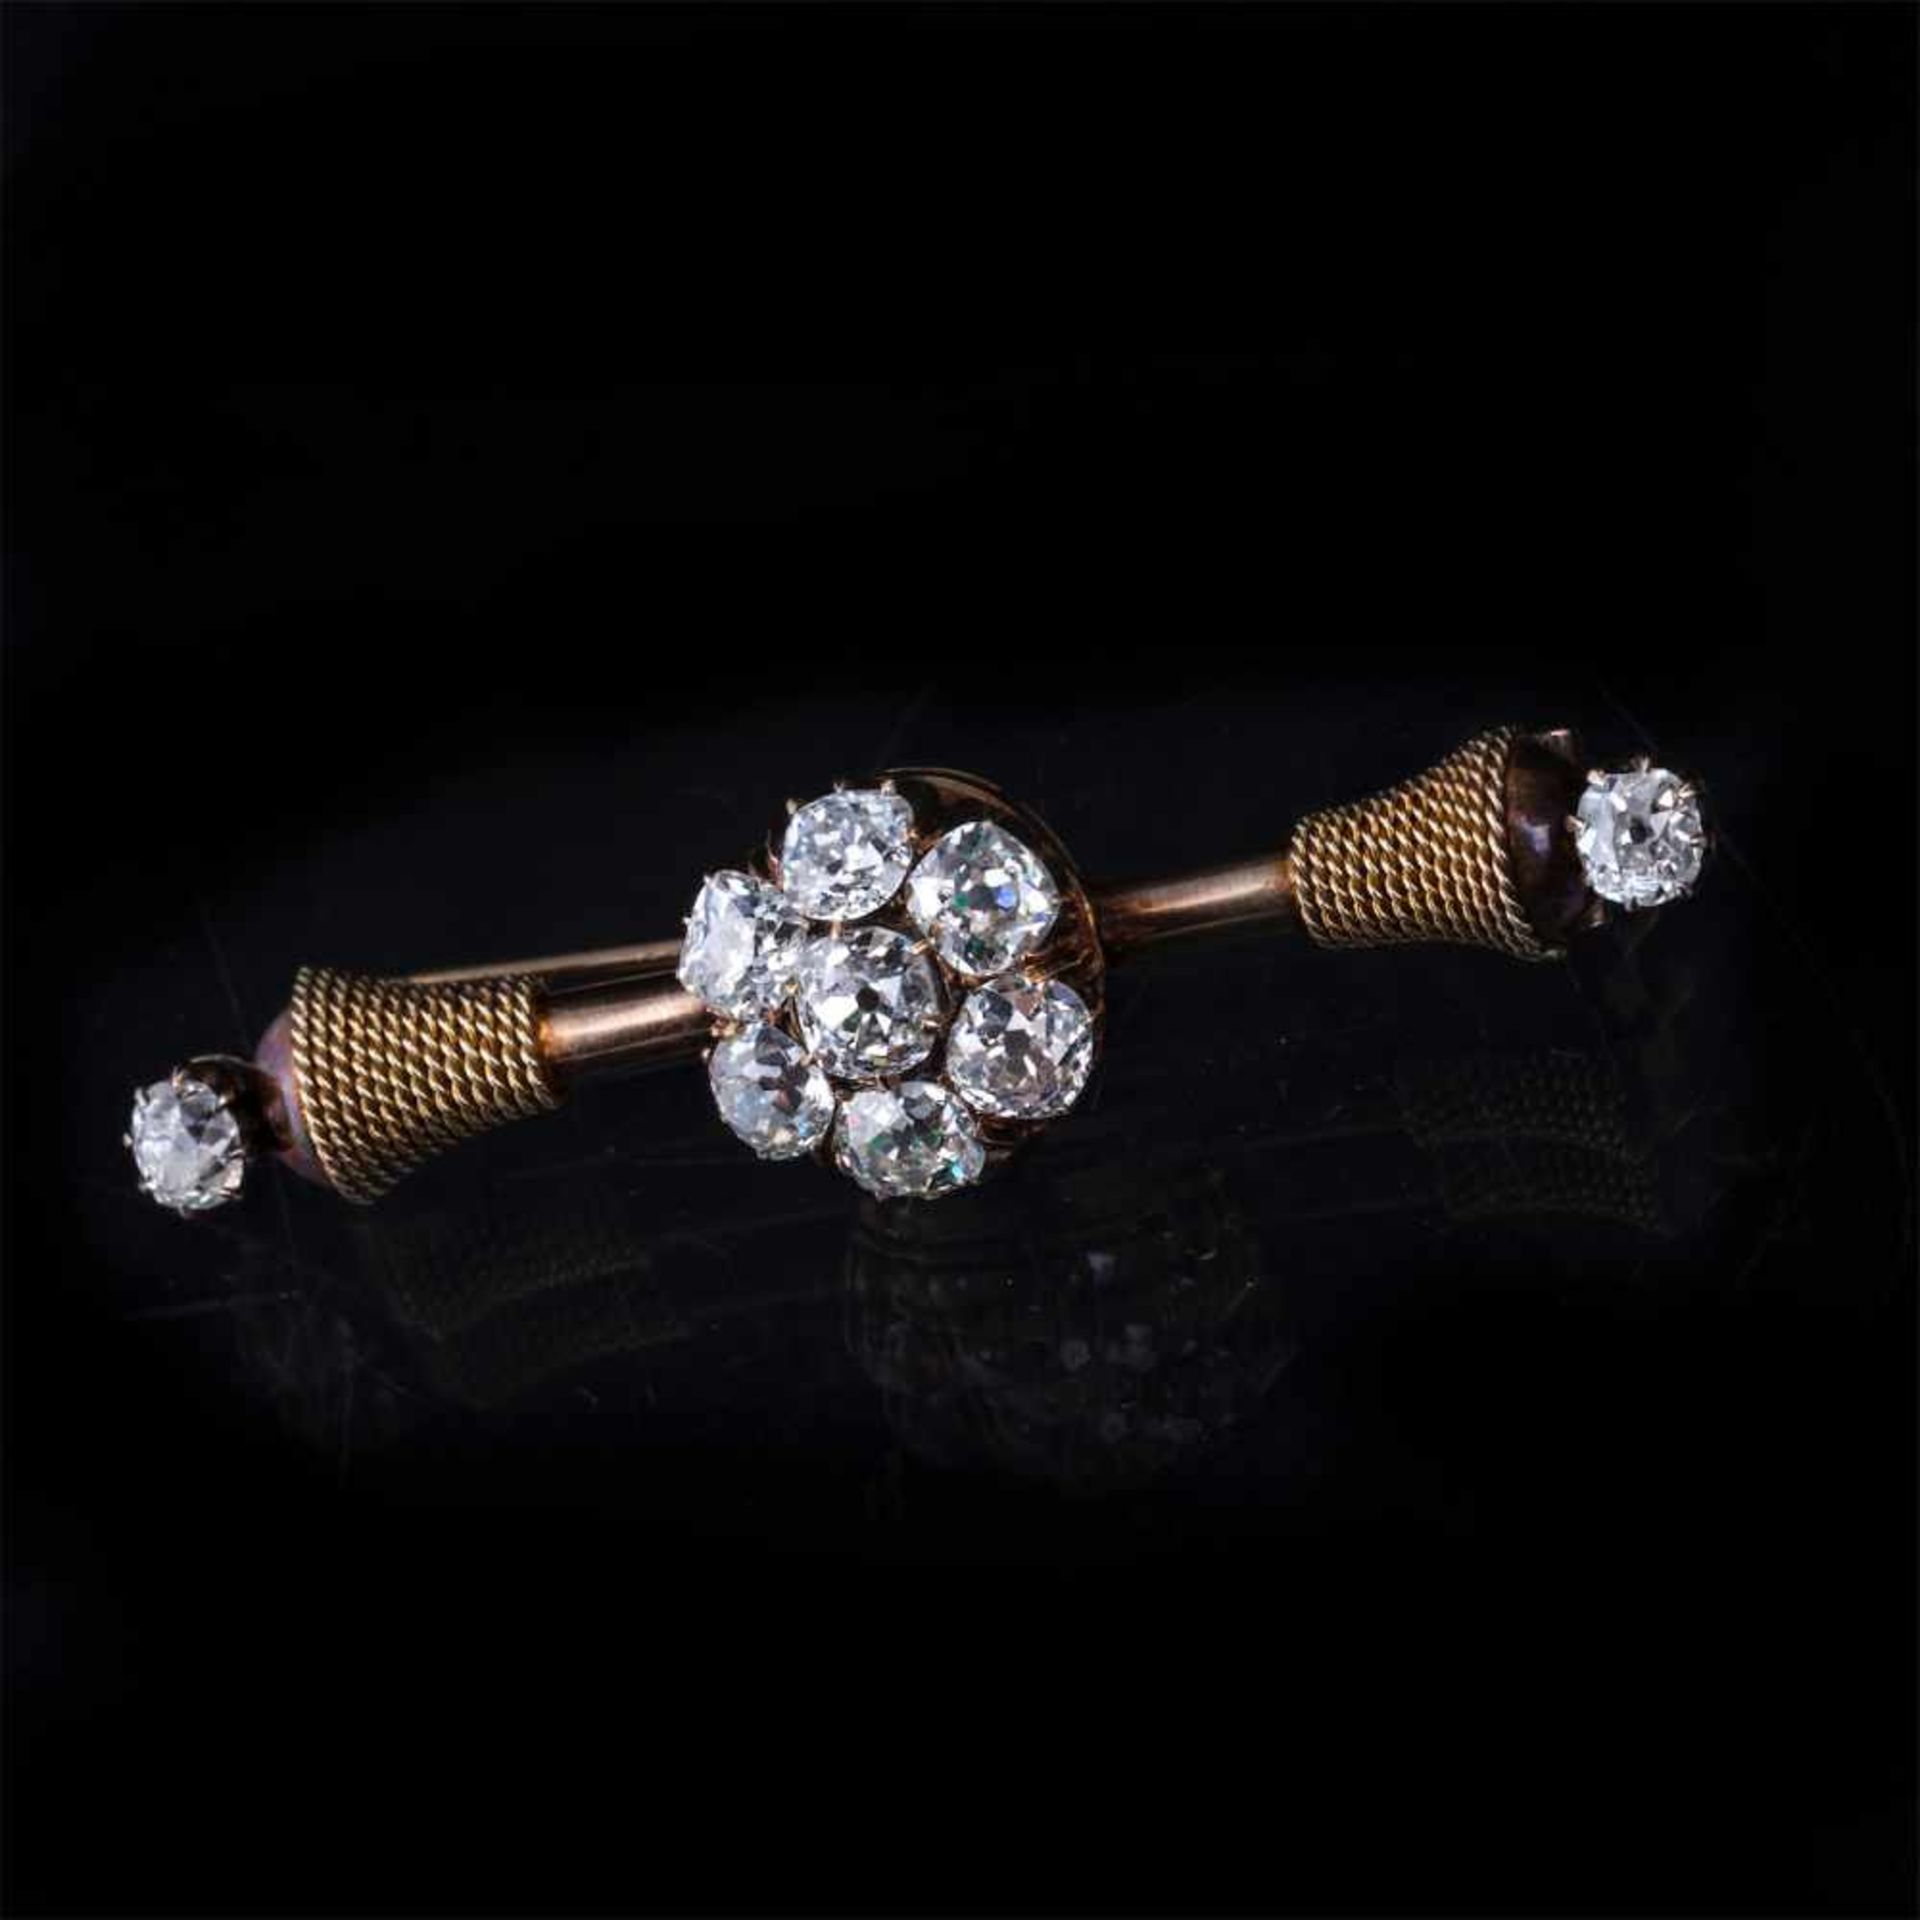 Russian gold 14K brooch with old cut diamondsRussian gold 14K brooch with old cut diamonds. 14K gold - Bild 4 aus 5